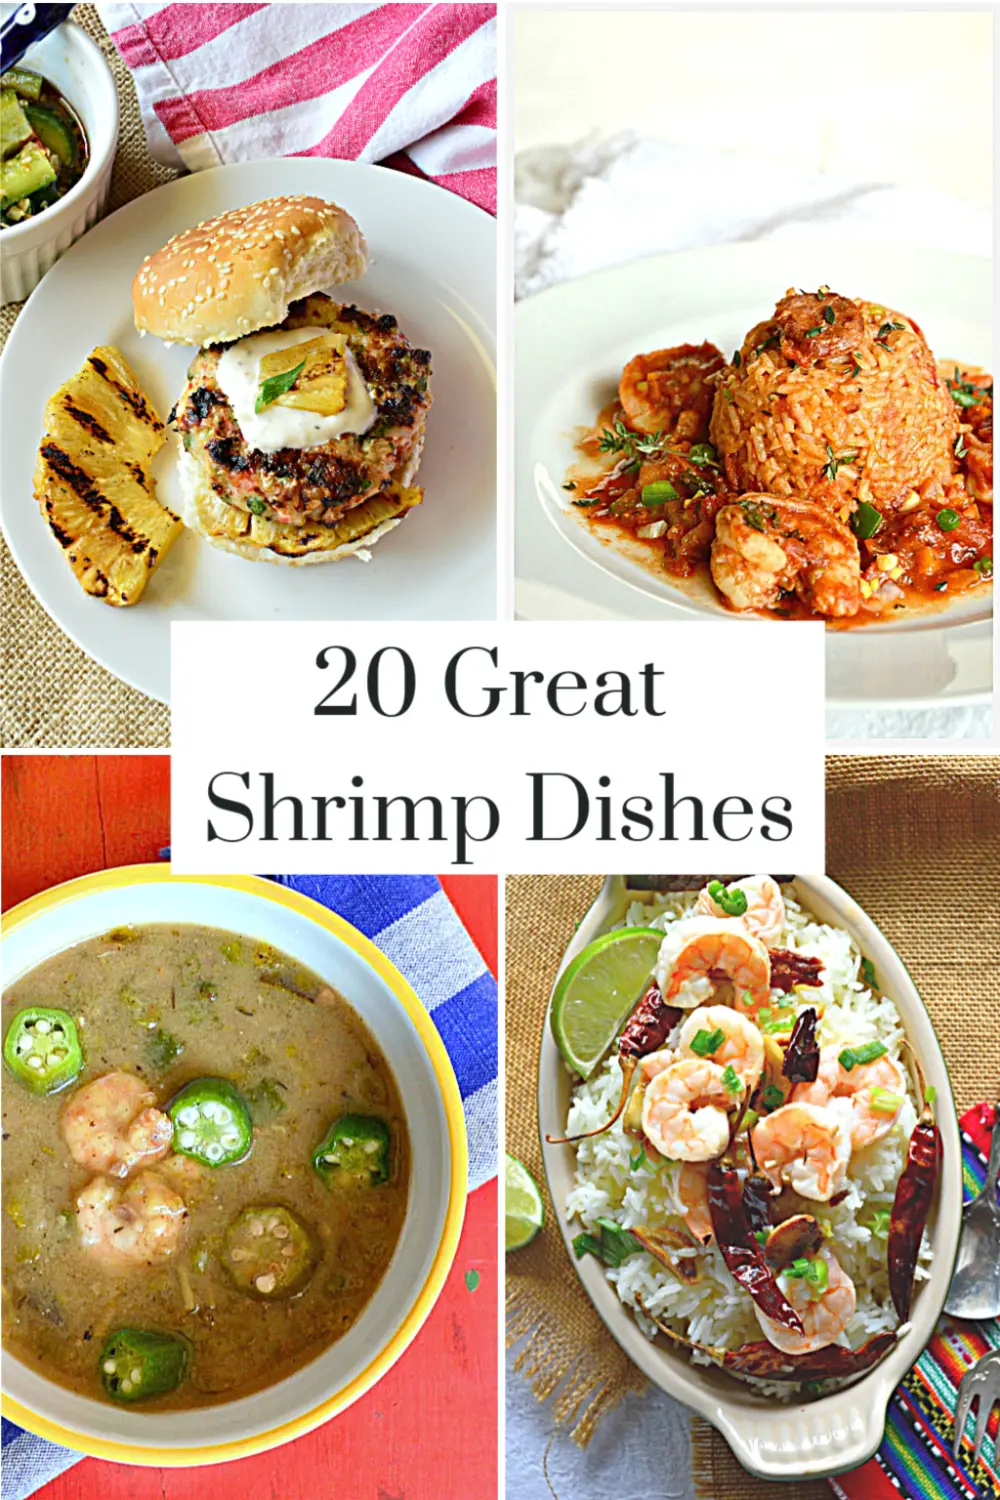 20 Great Shrimp Dishes with 4 Pictures